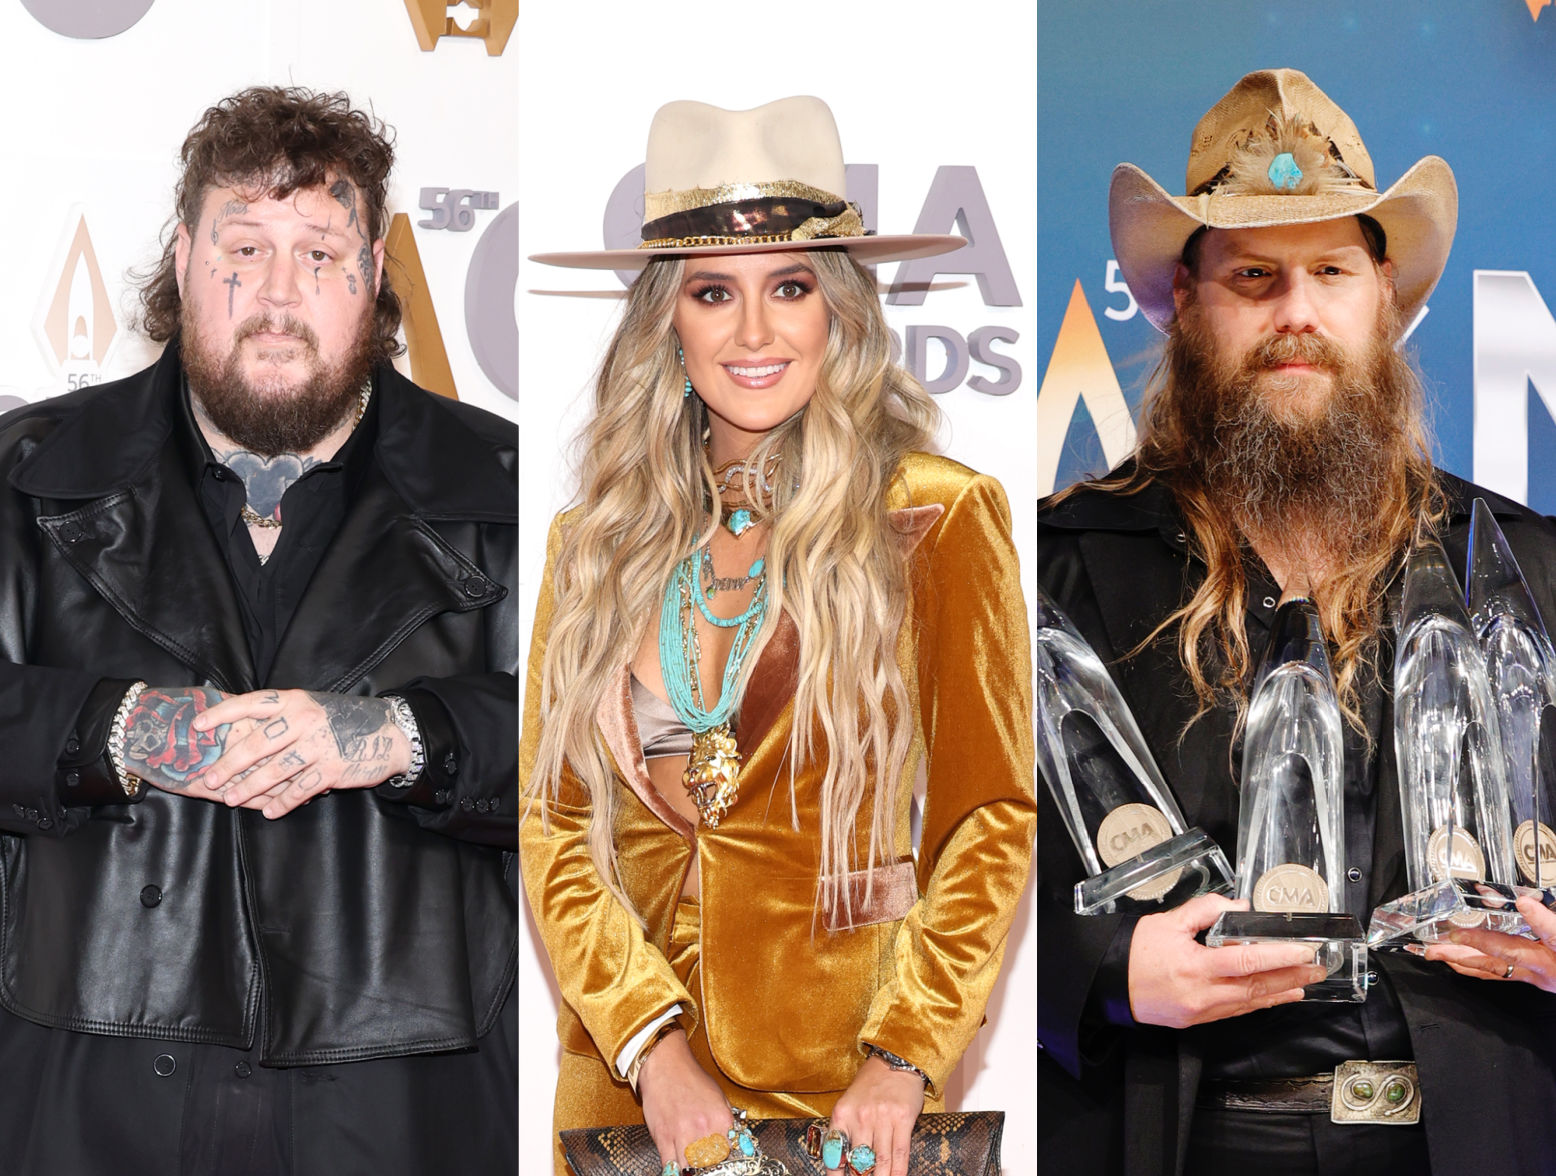 Lainey Wilson on the 56th CMA Awards and finally arriving at stardom